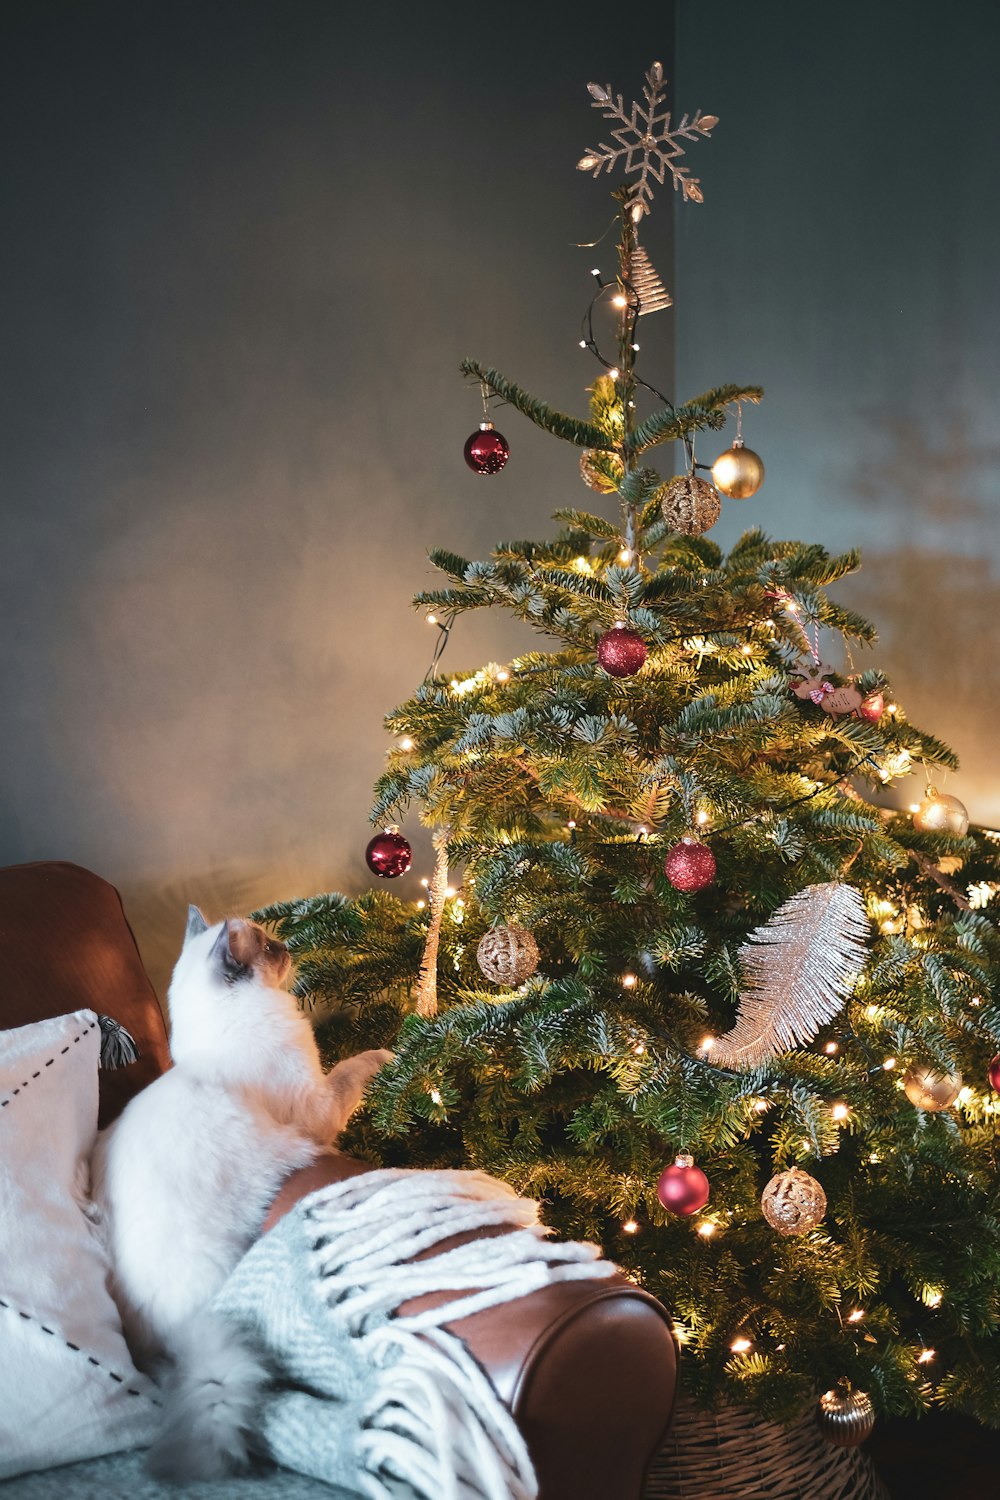 white and brown cat on white textile beside green christmas tree